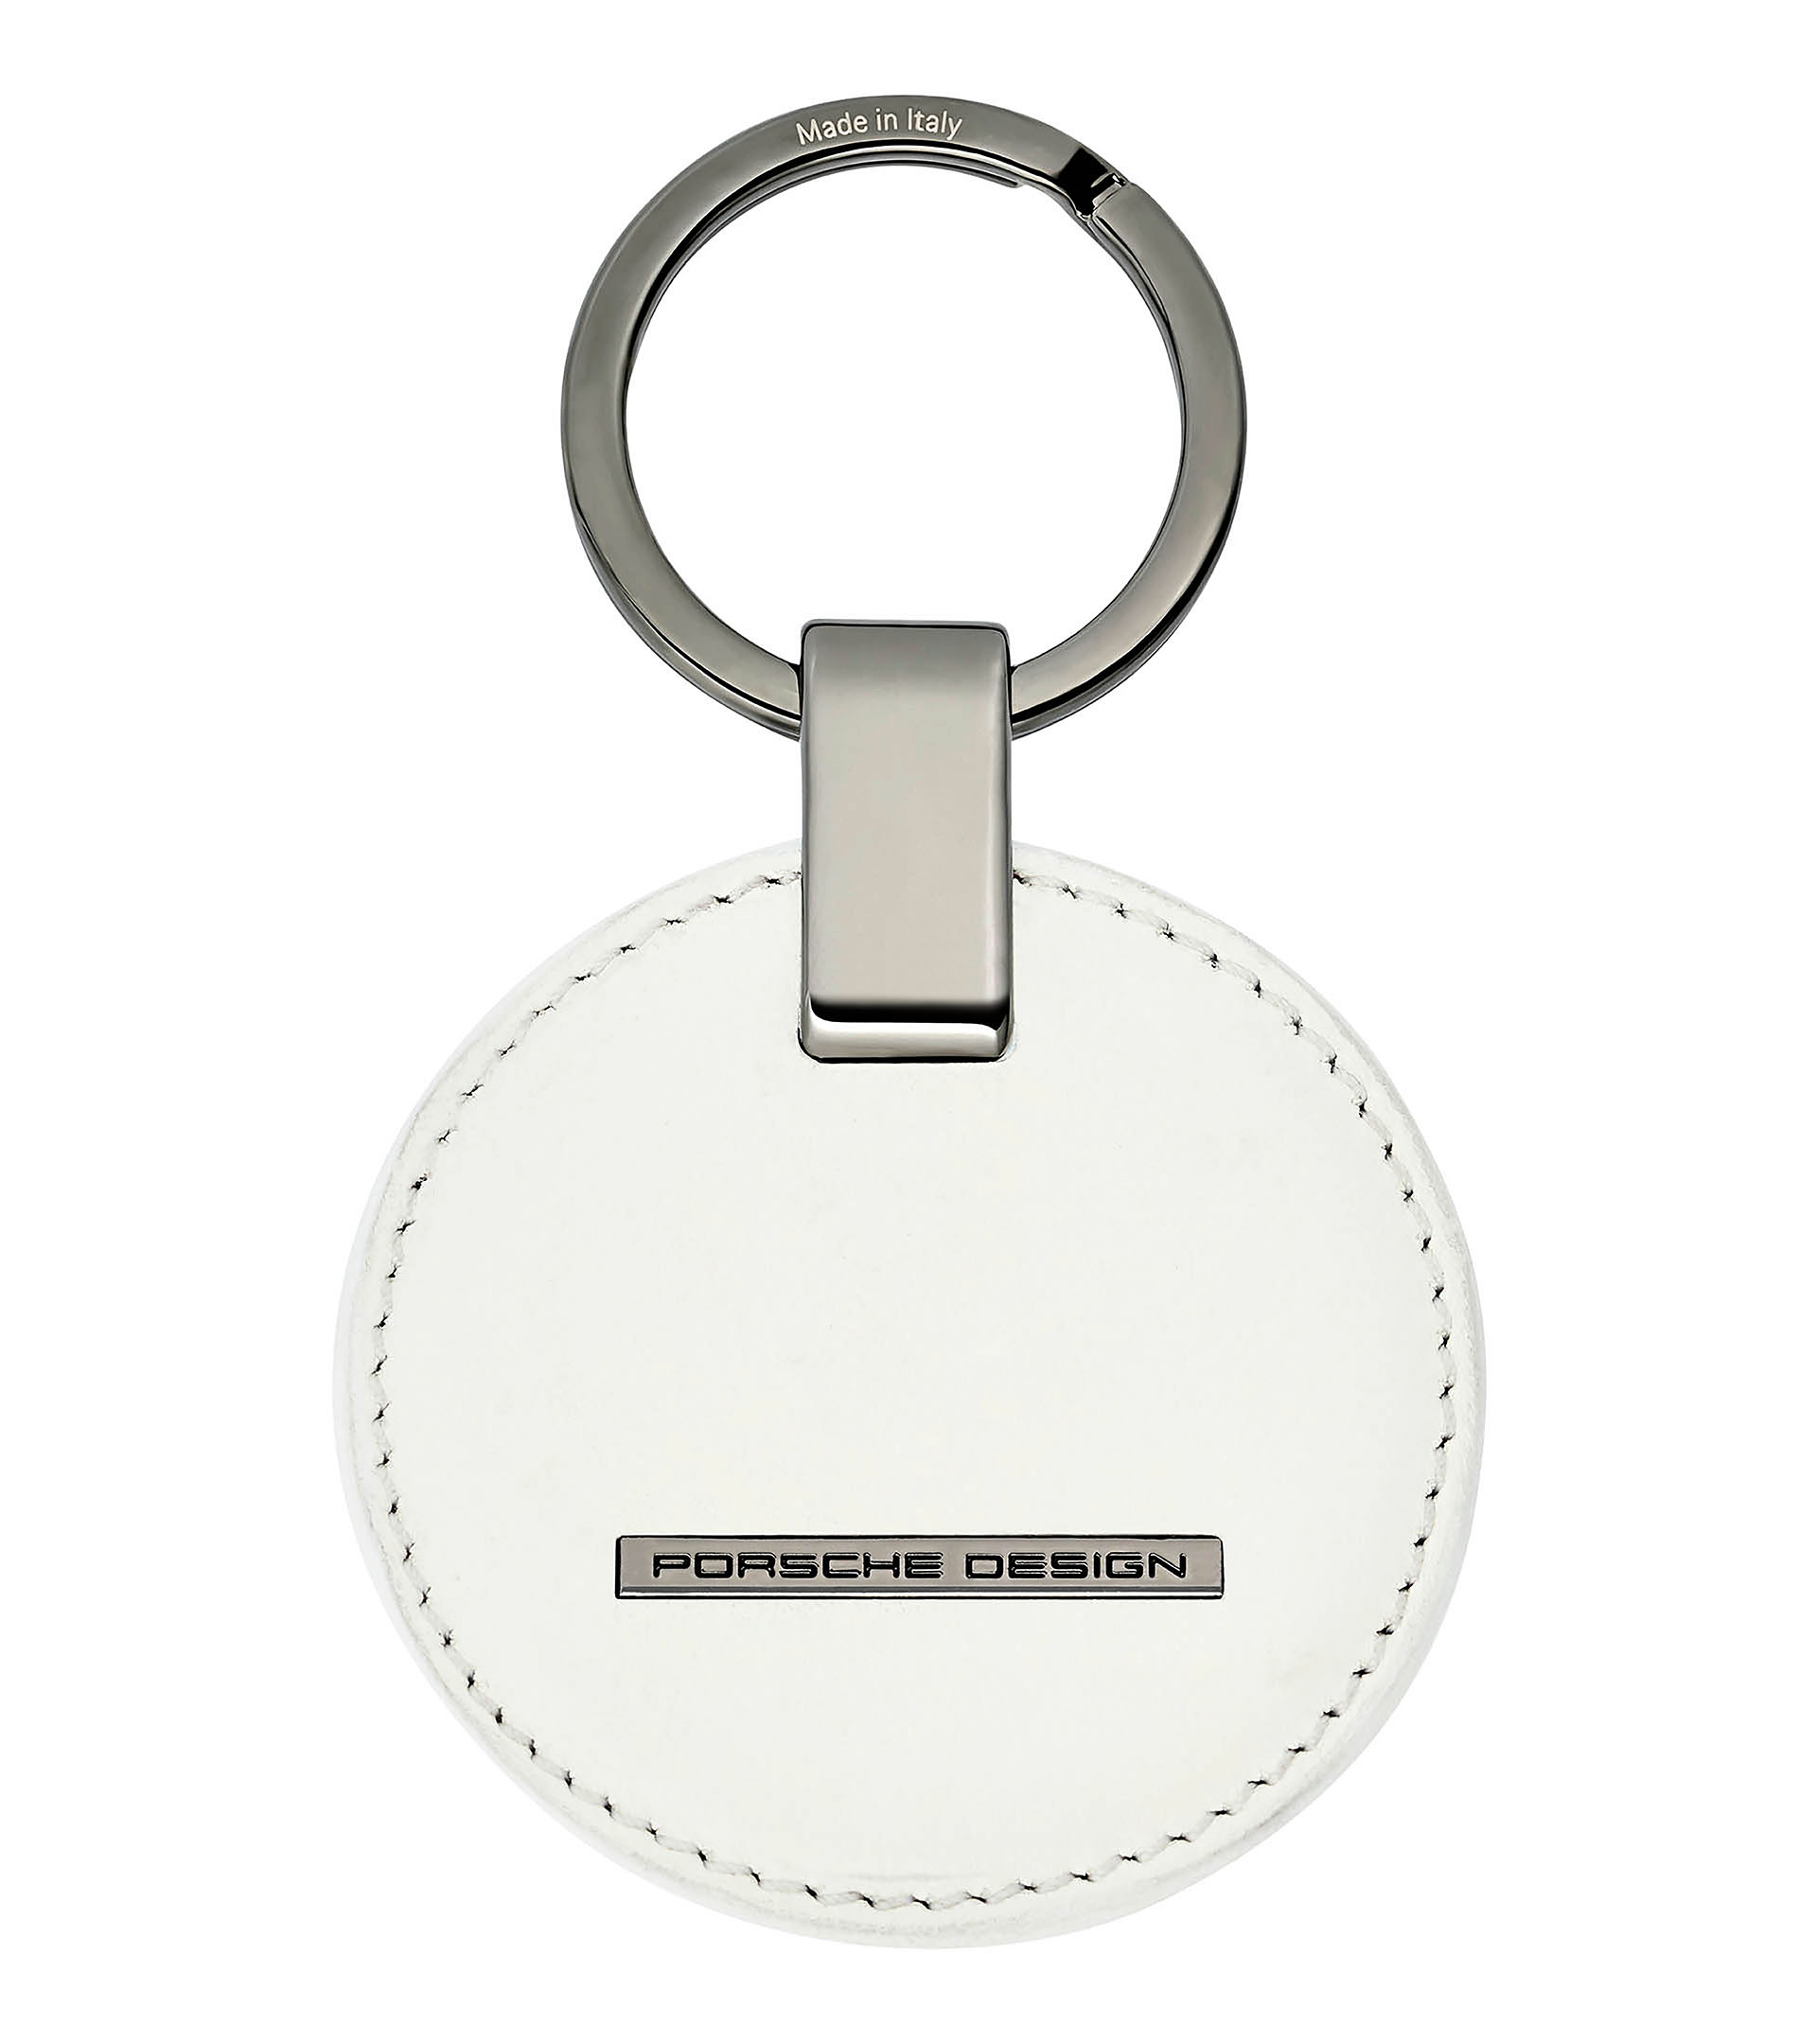 open key ring, open key ring Suppliers and Manufacturers at